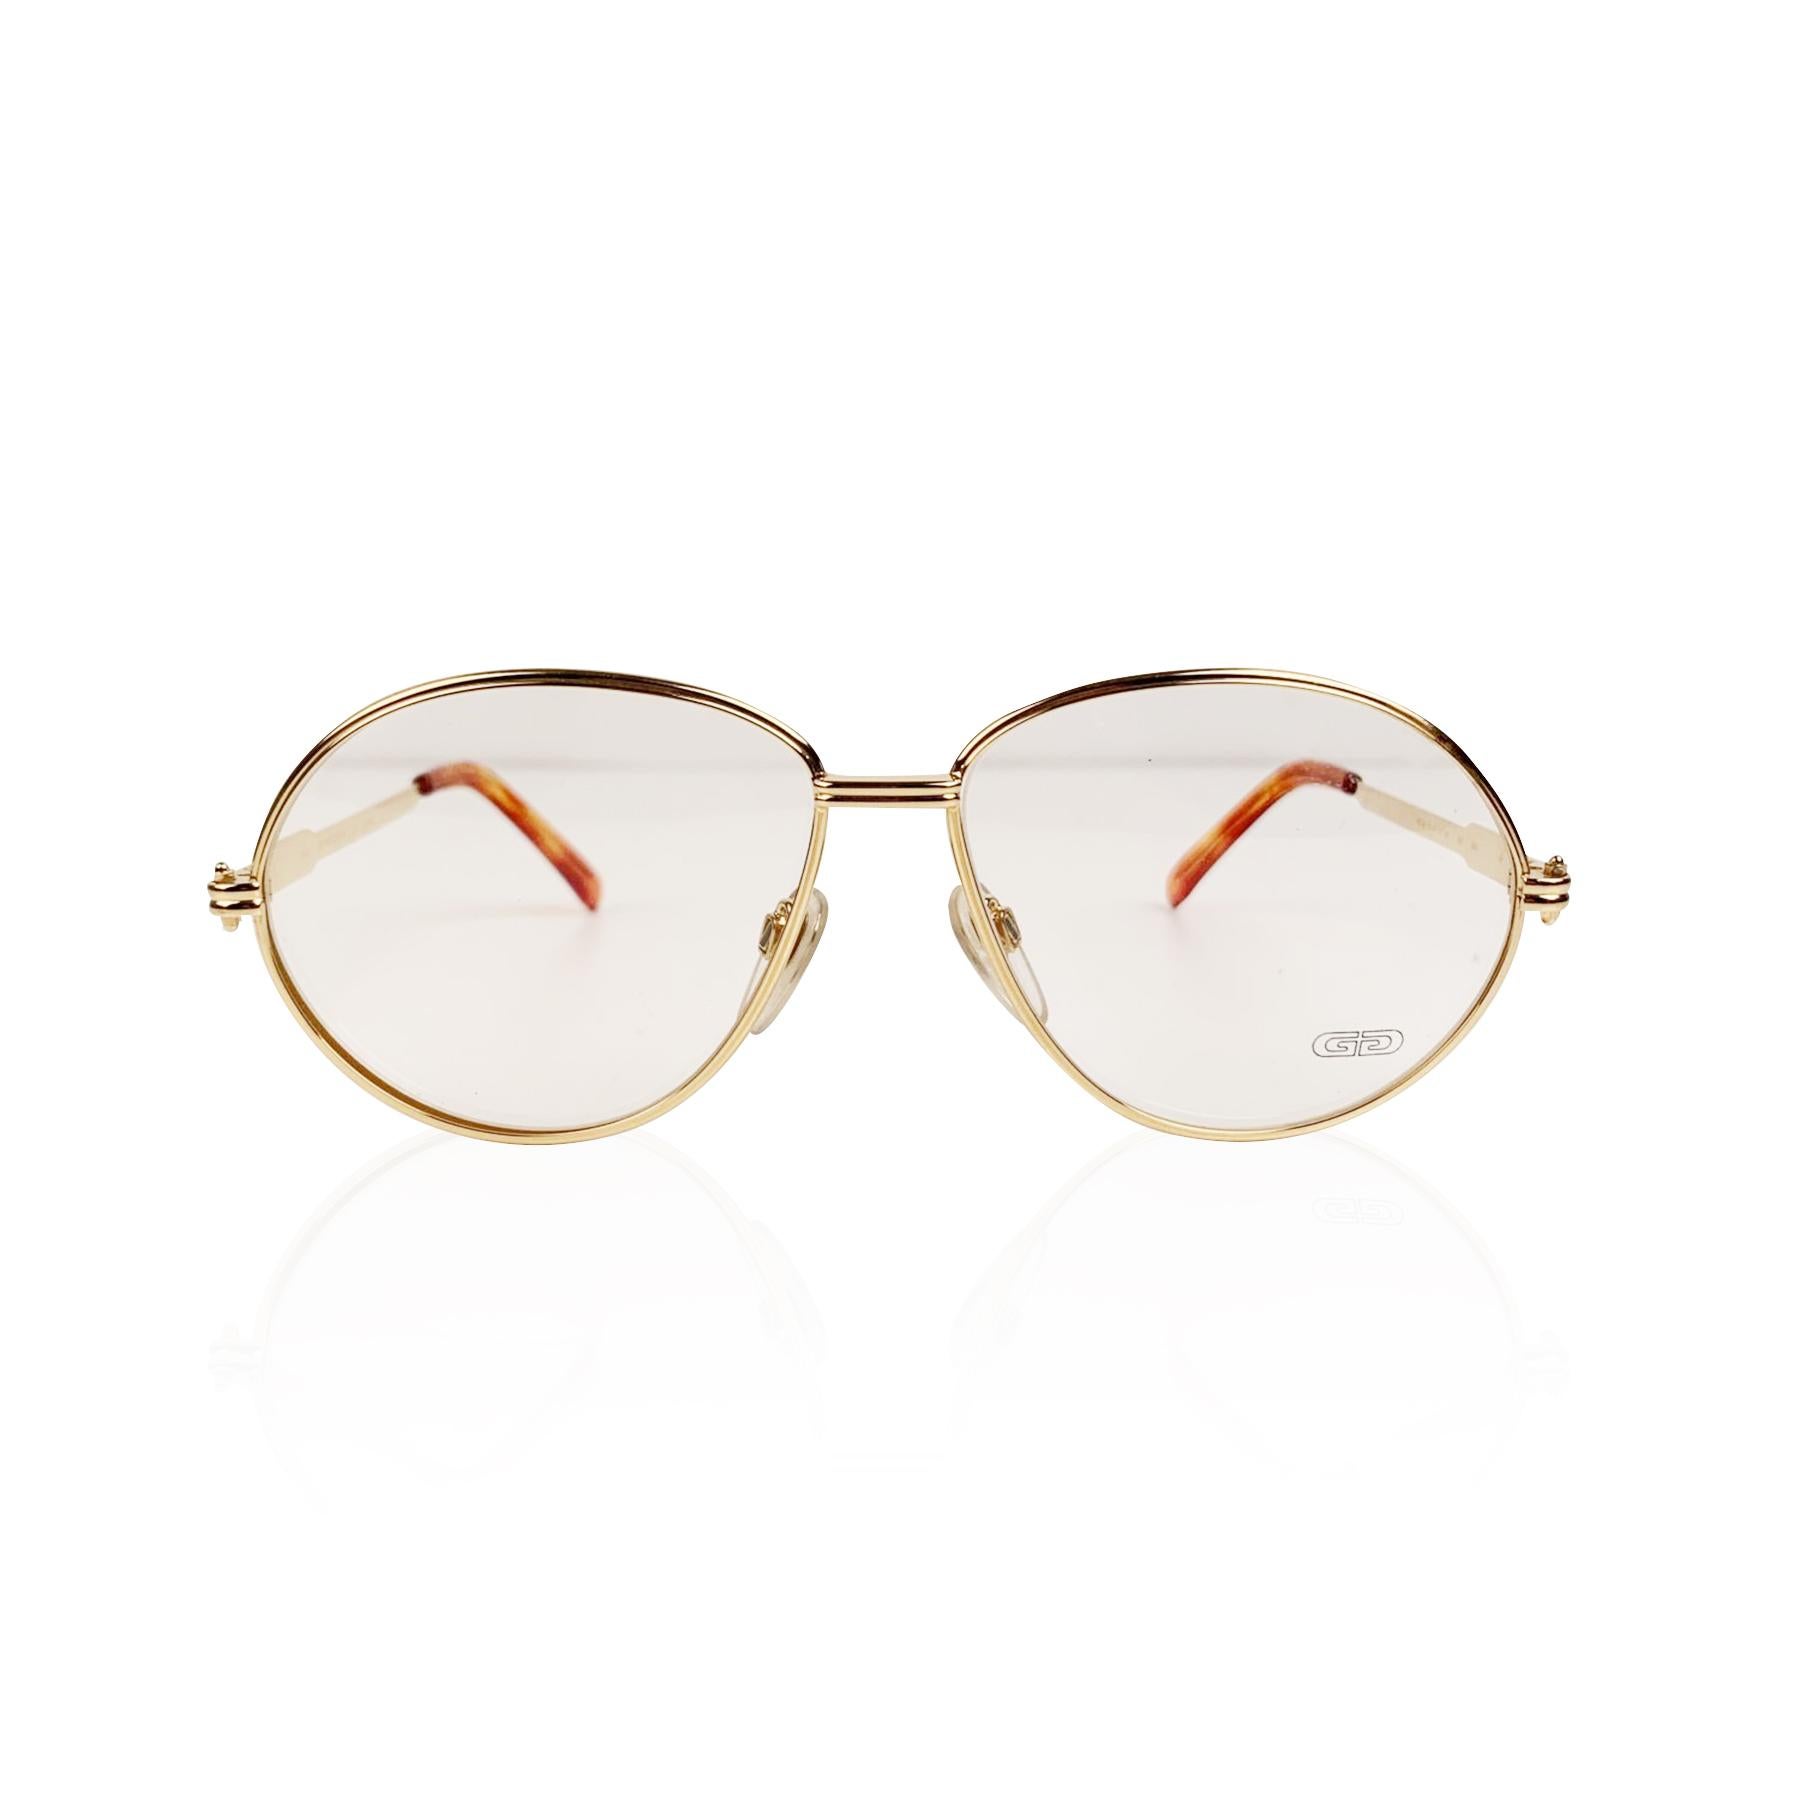 Gold plated eyeglasses by Gerald Genta by Orama, from the early 1990s. Model: New Classic 06 - AU - 140 - 9104753. Beautiful gold frame. Clear demo lenses. Hand Made in Japan



Details

MATERIAL: Gold Plated

COLOR: Gold

MODEL: New Classic